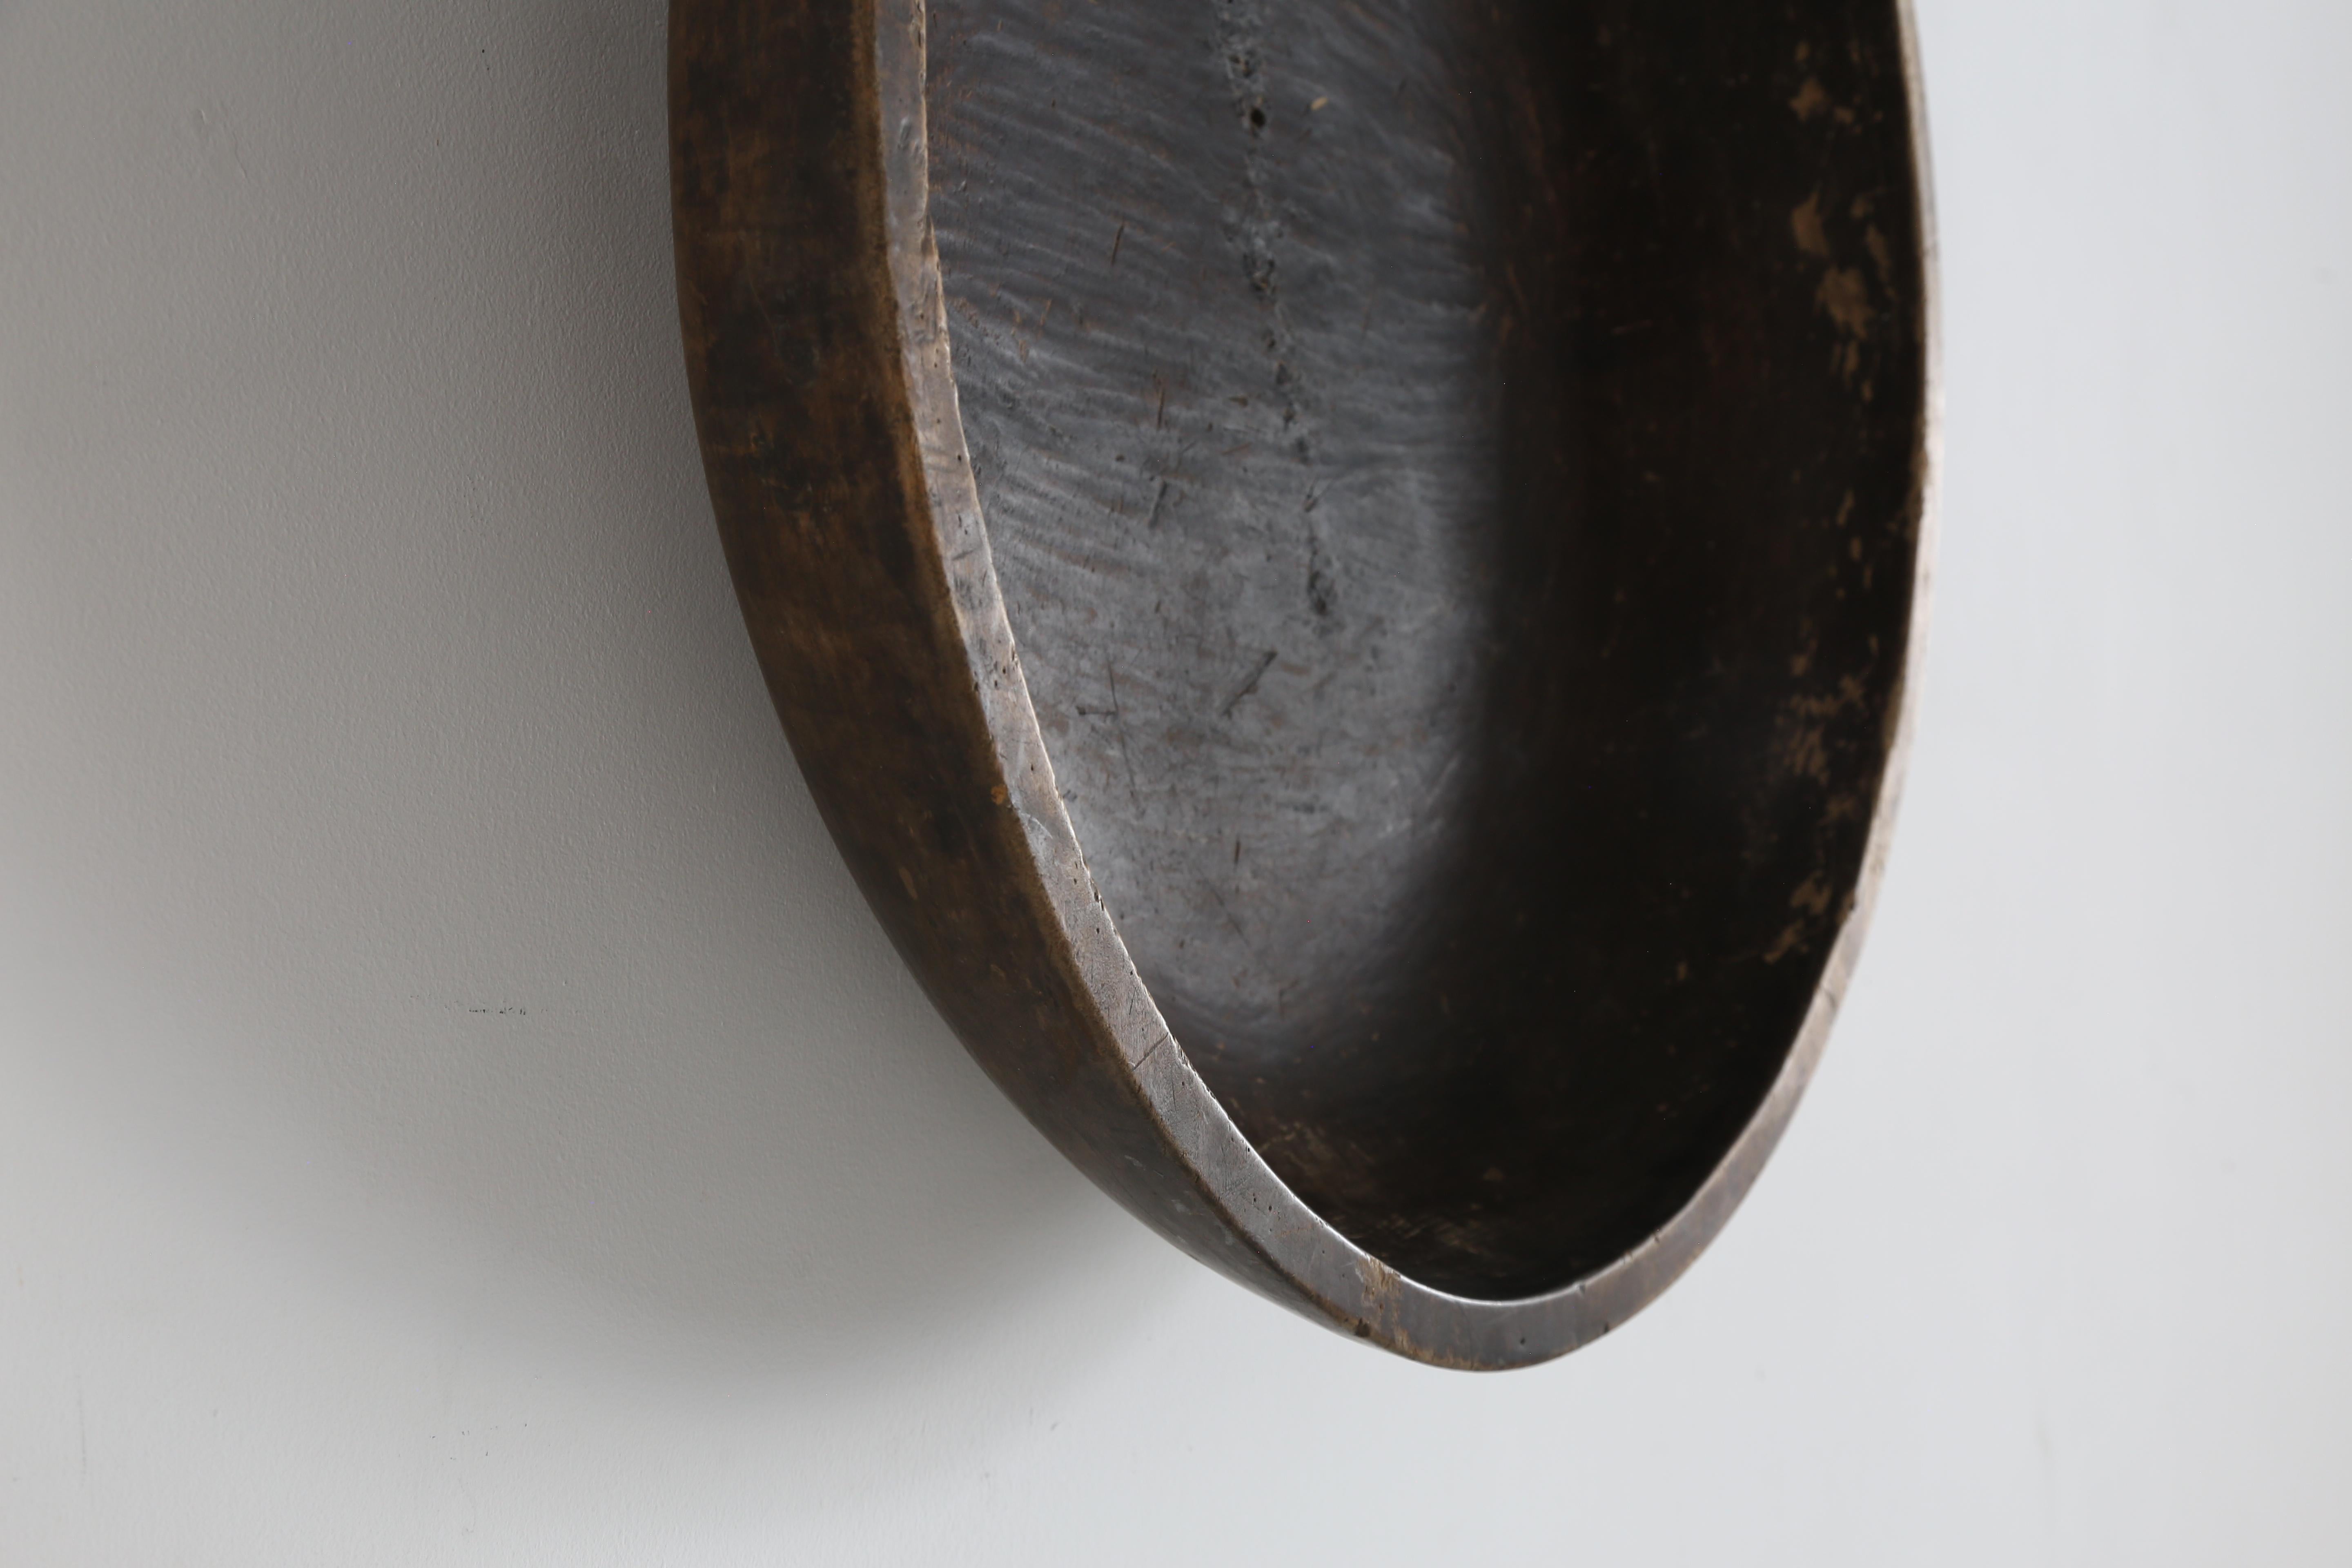 Japanese wabi sabi preparation bowl. 

Monoxyle i.e carved from one solid piece of cedar wood.

Dating from the late Edo period circa 1850s. 

Makes a wondrous wall hanging or table centrepiece.  

L64cm x W61 x D20cm